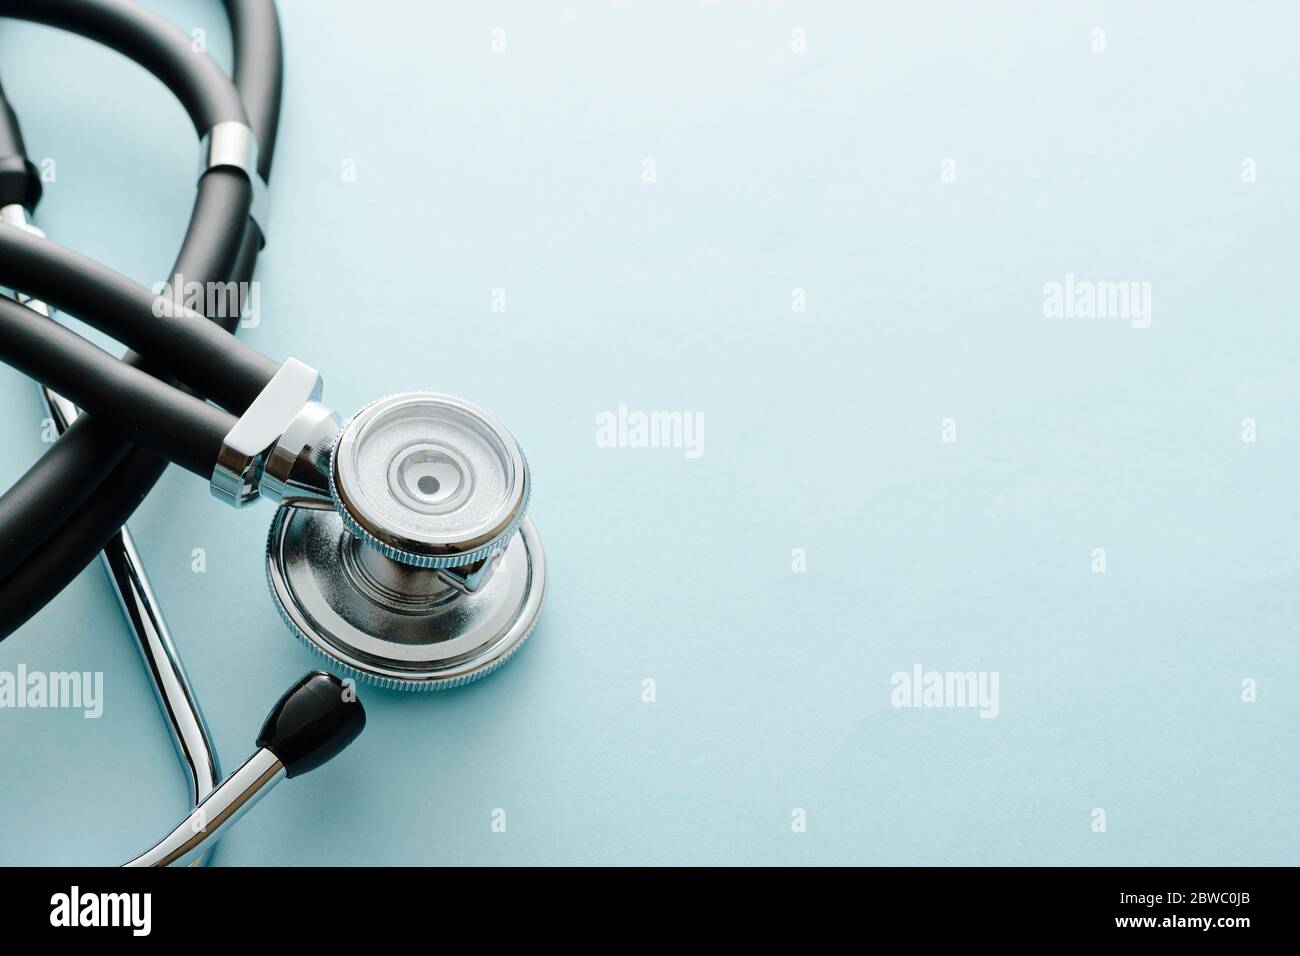 A coiled stethoscope with focus to the acoustic disc on white with copy space in a medical, healthcare or Covid-19 pandemic concept viewed from above Stock Photo